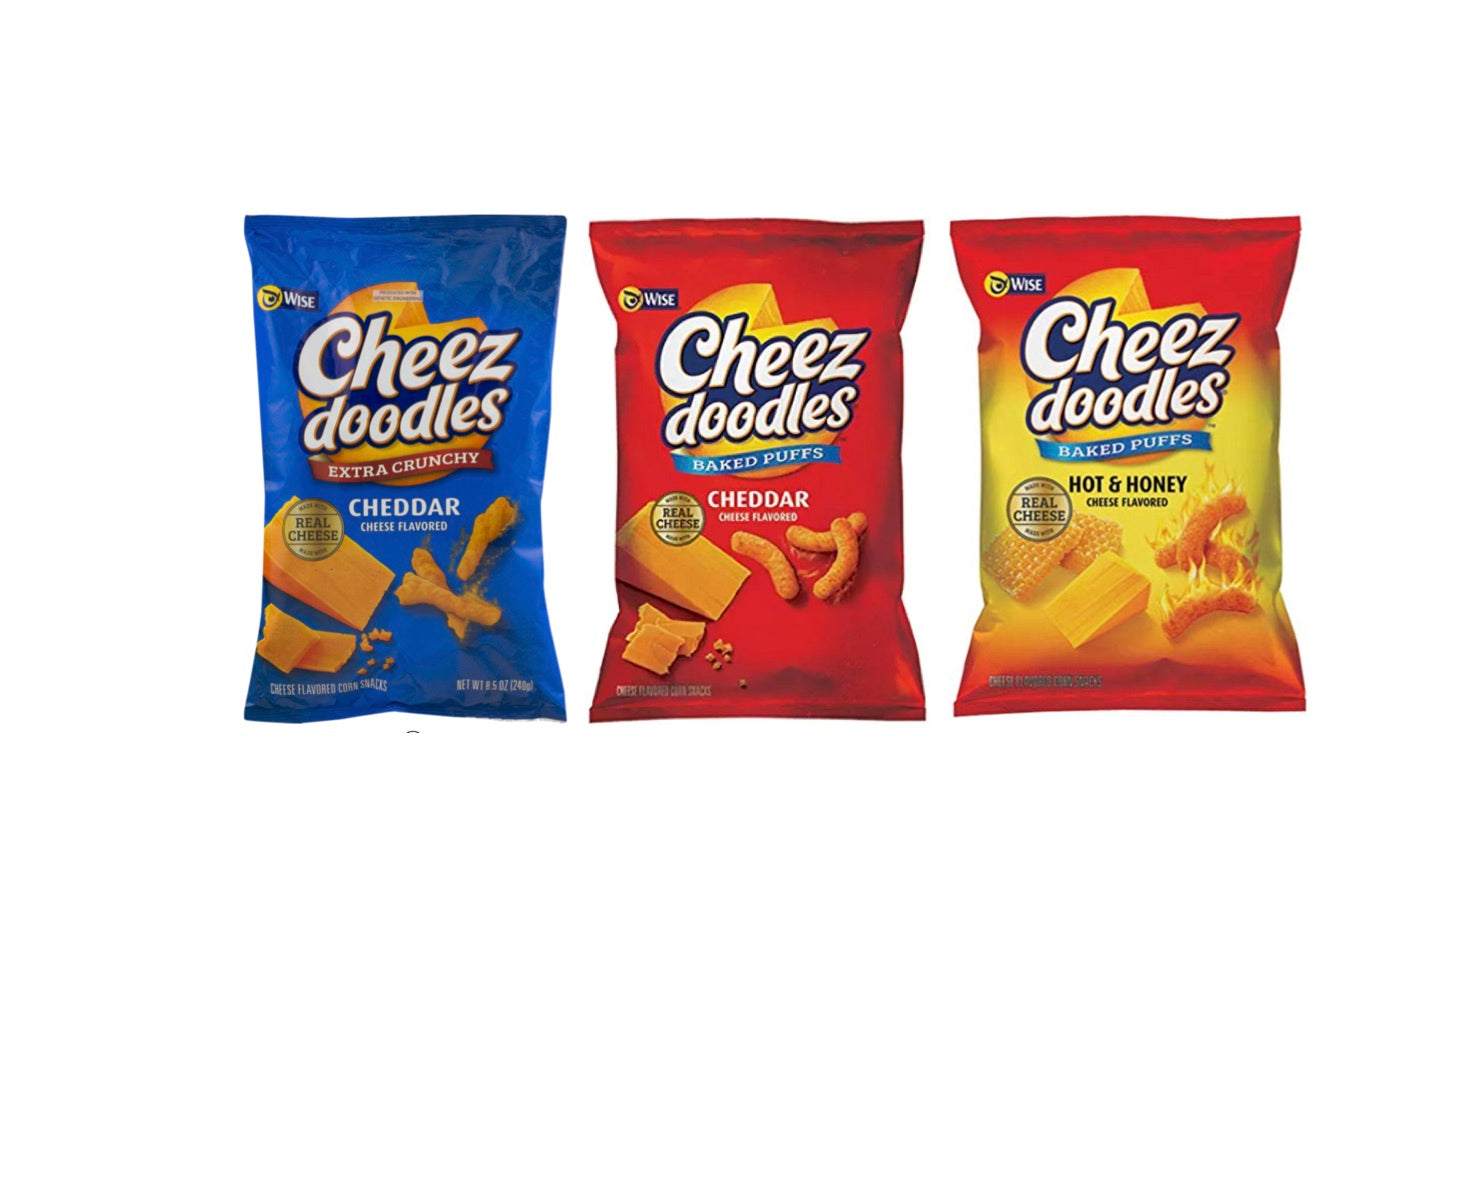 Wise Snacks Cheez Doodles Variety Pack Extra Crunchy, Baked Cheddar Puff, Baked Hot & Honey Cheese Flavors bags (3 count)